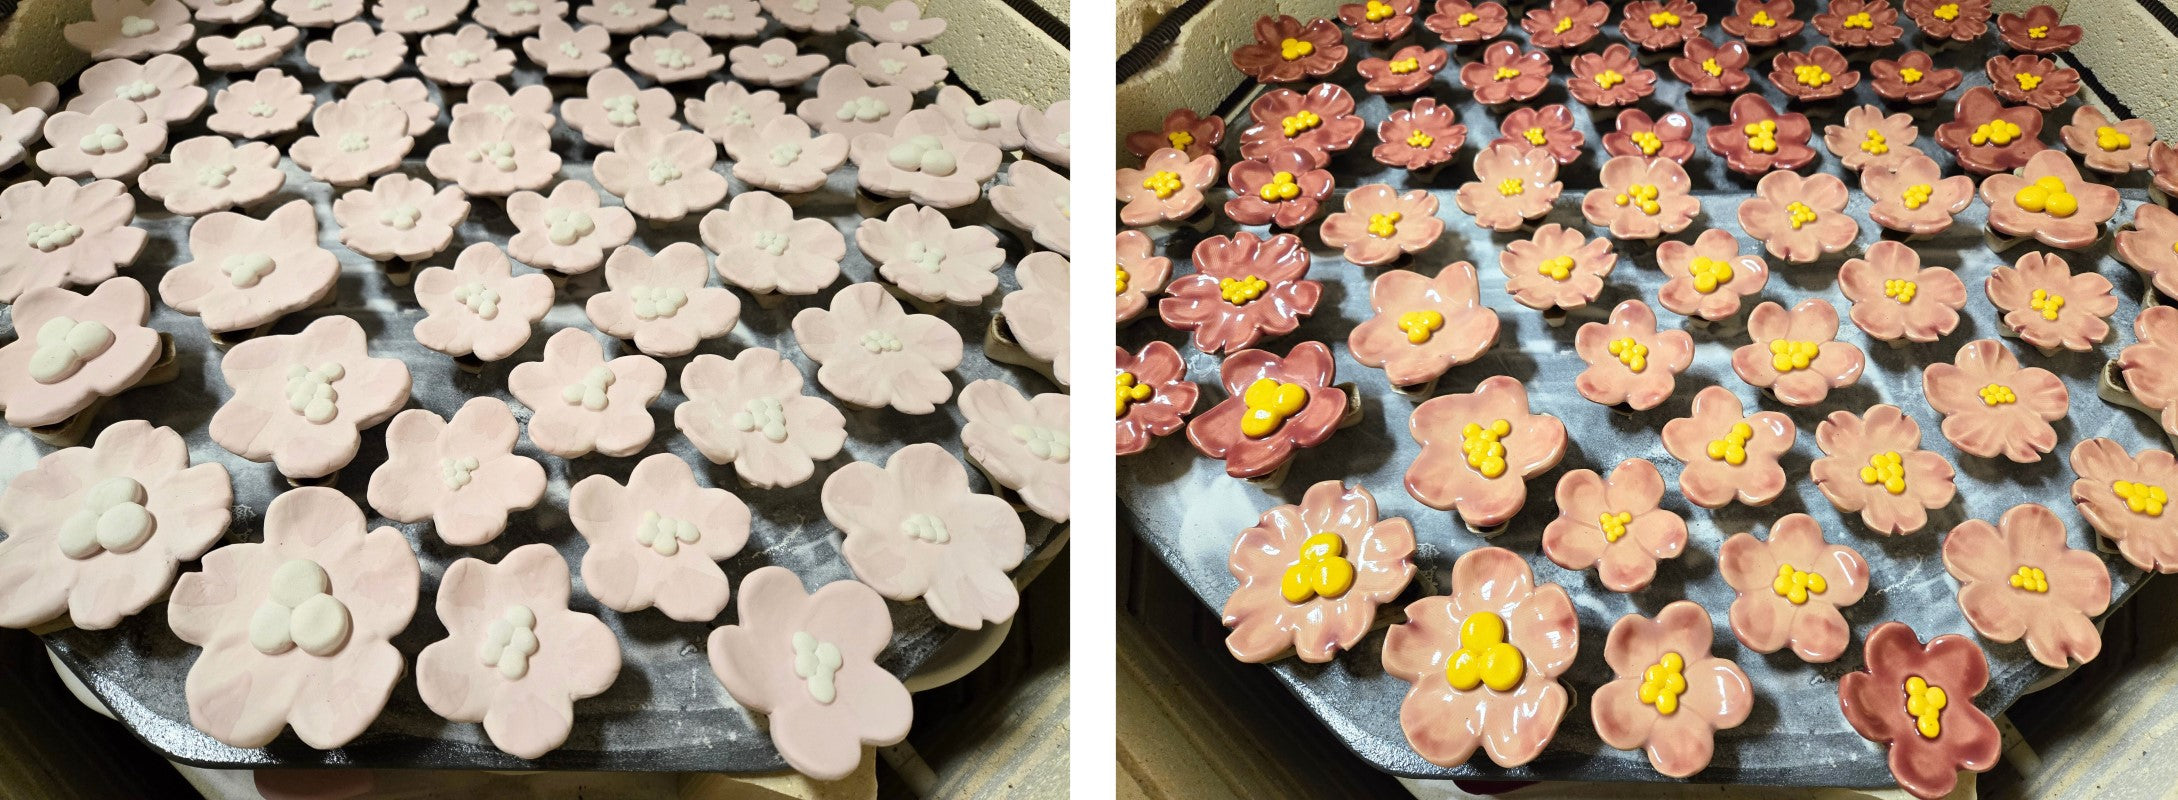 On the left is the glazed but unfired flowers sitting on a kiln shelf. On the right is the same flowers, having been fired. The glaze has turned from pale matte pink to shiny bright pink.